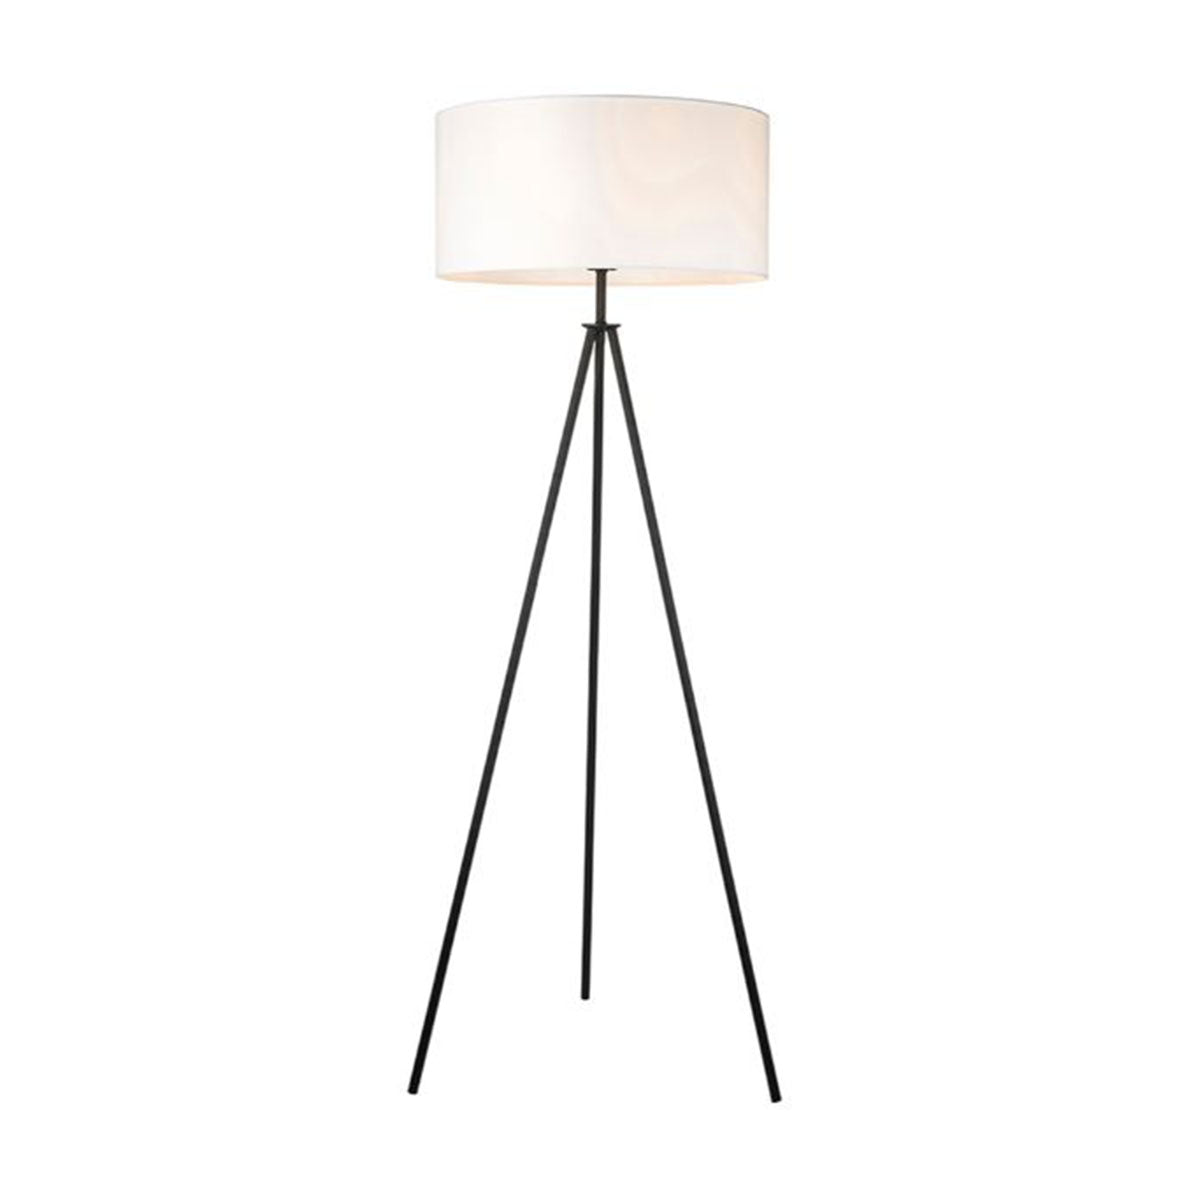 Tripod Floor Lamp with White Shade